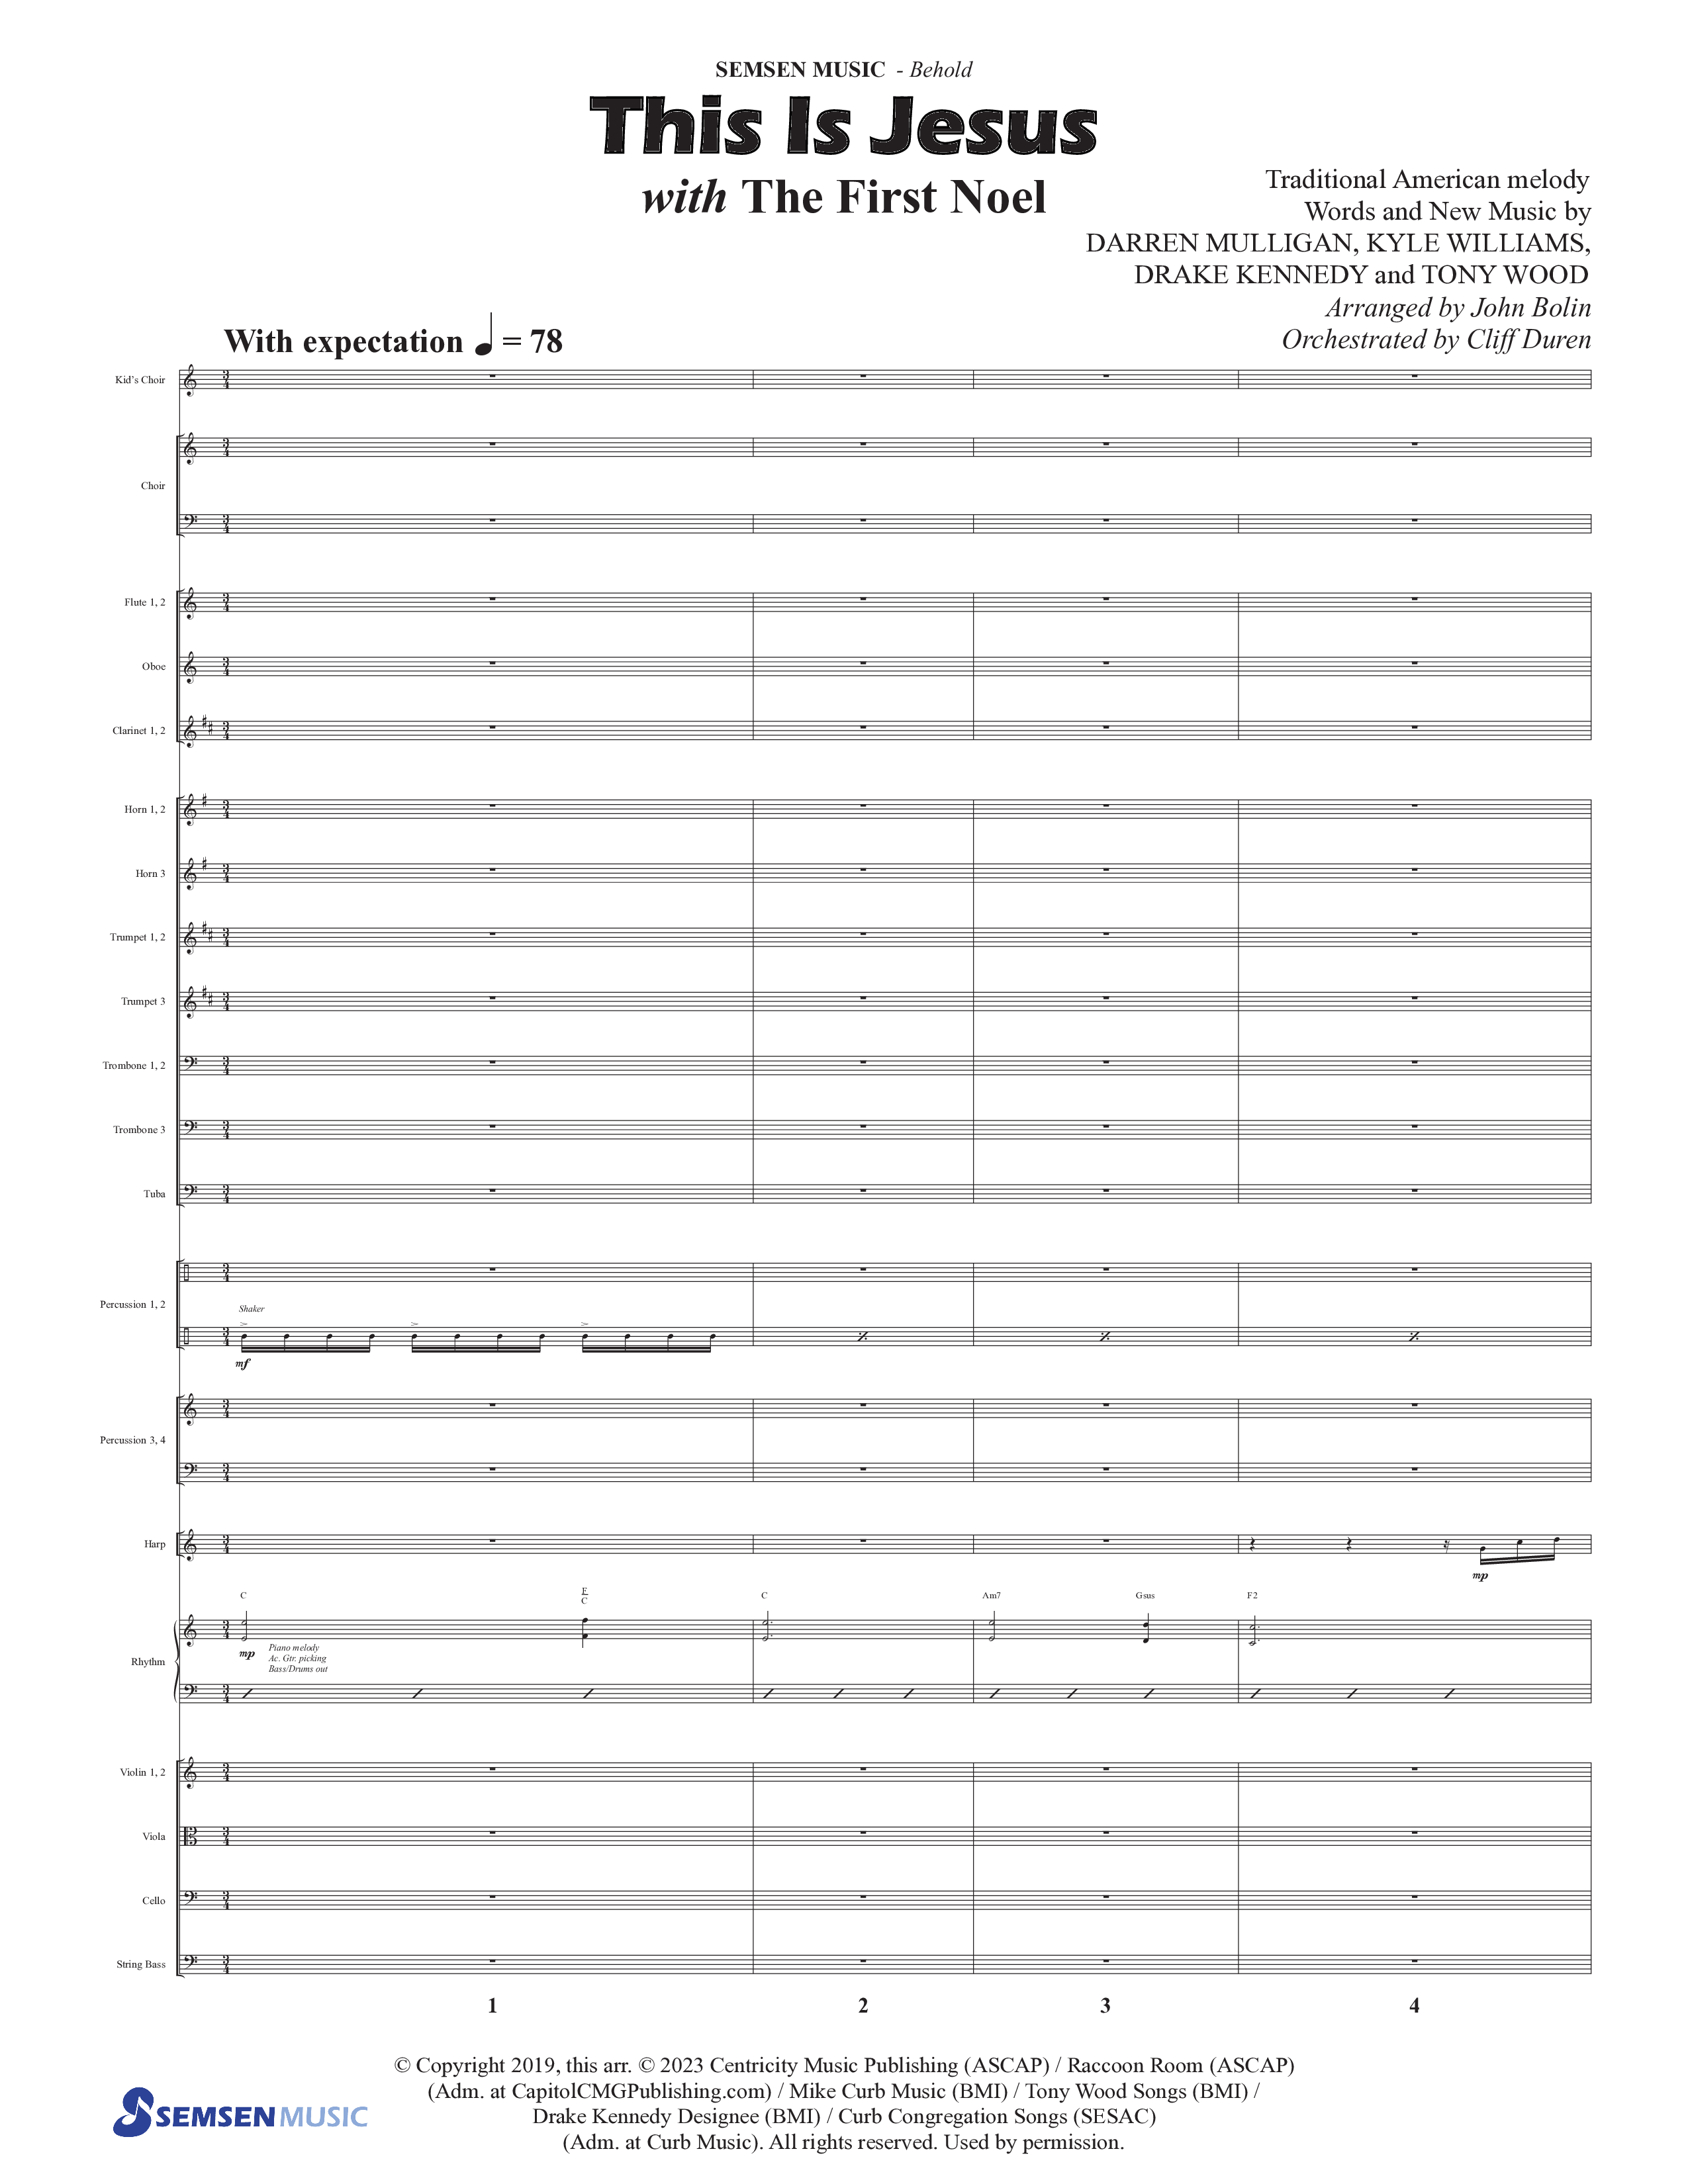 Behold (9 Song Choral Collection) Song 3 (Orchestration) (Semsen Music / Arr. John Bolin / Orch. Cliff Duren)